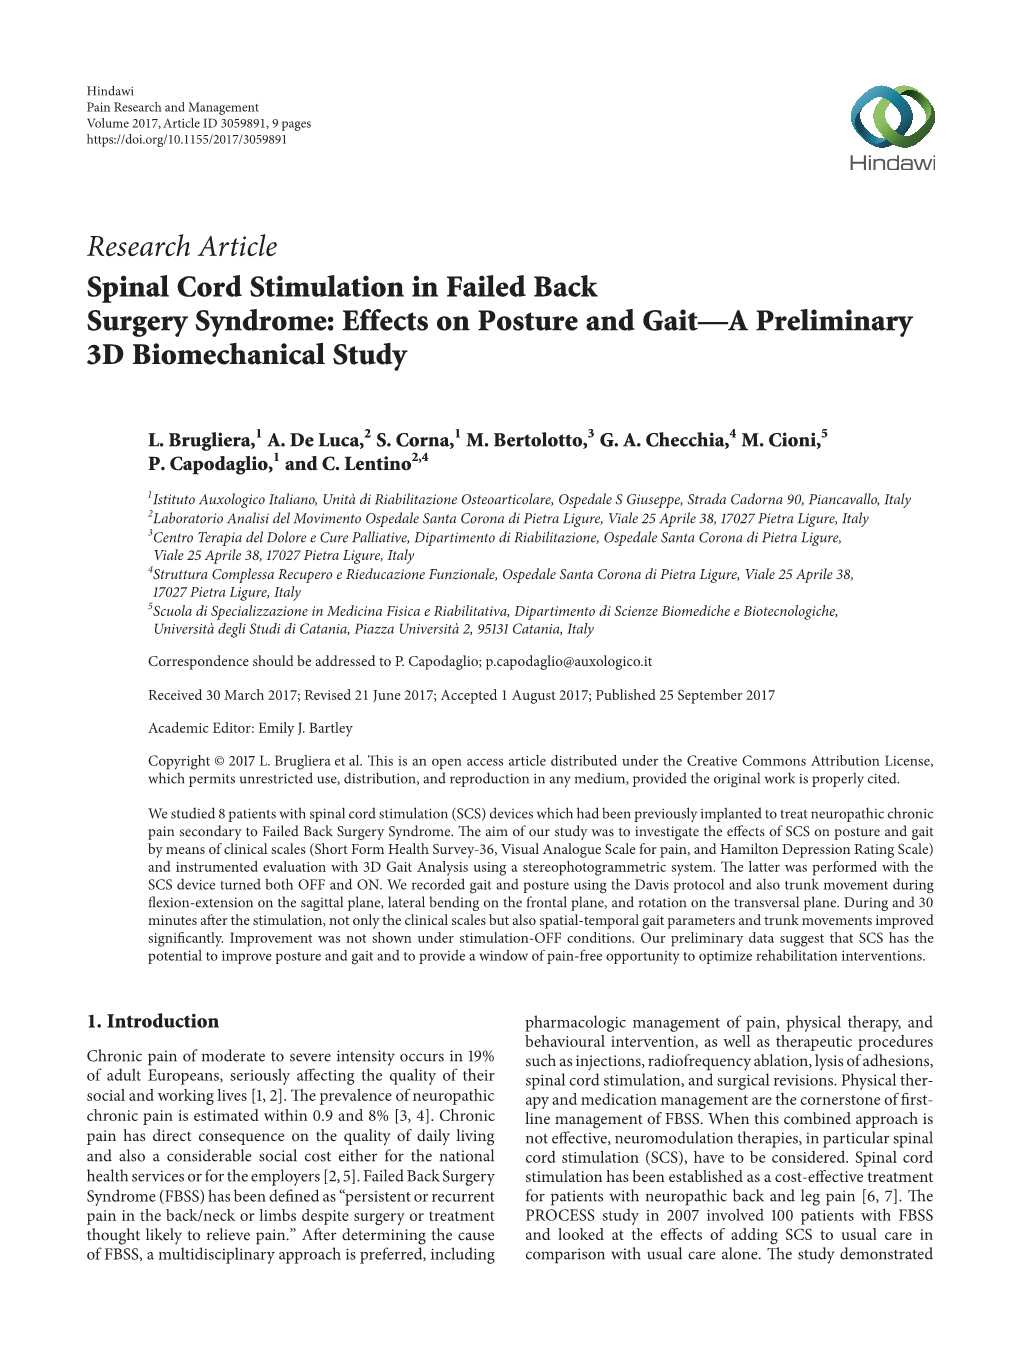 Spinal Cord Stimulation in Failed Back Surgery Syndrome: Effects on Posture and Gait—A Preliminary 3D Biomechanical Study